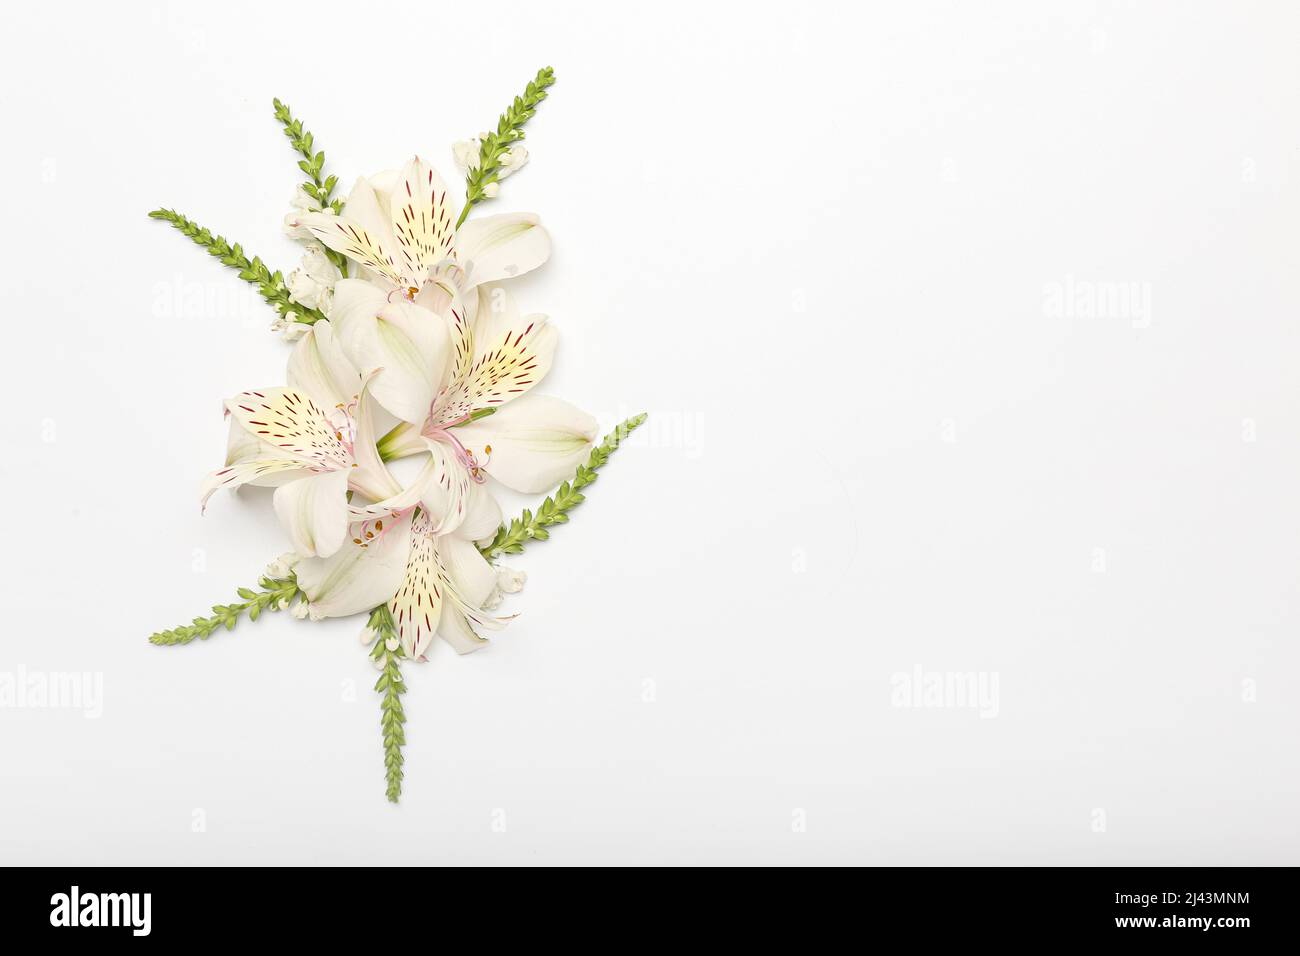 Composition with delicate flowers on white background Stock Photo